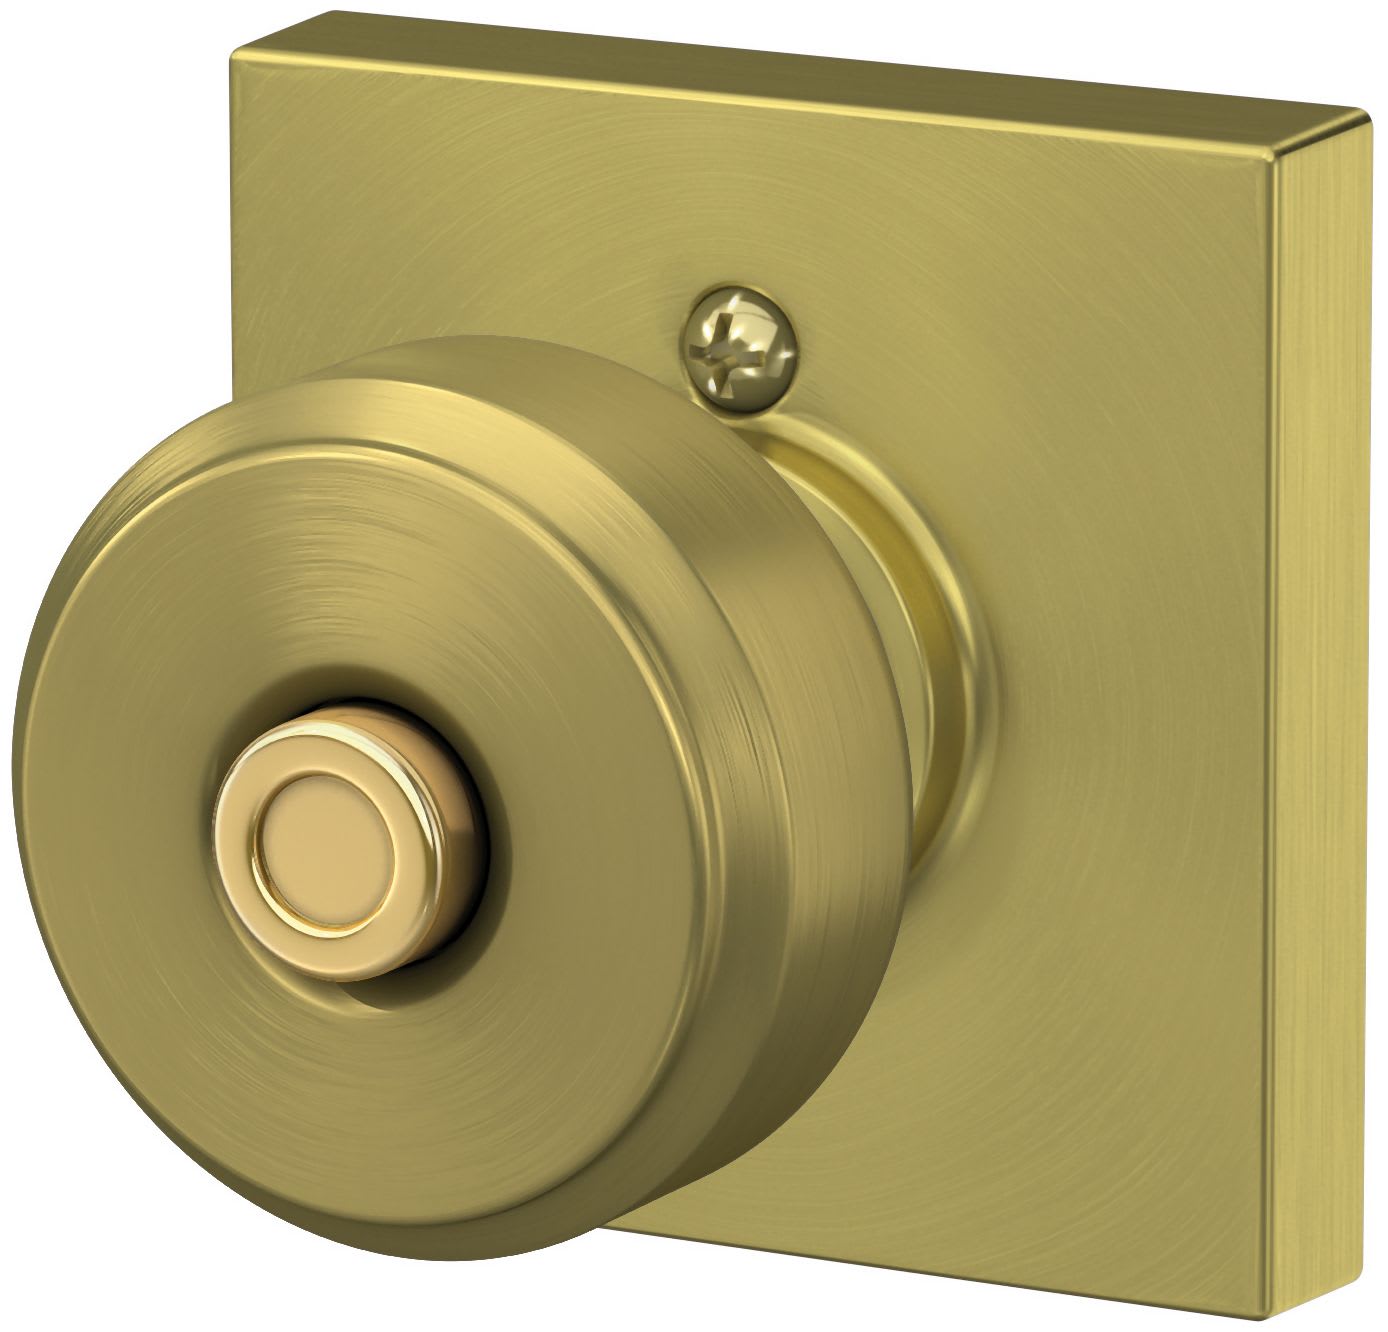 Schlage Bowery Privacy Door Knob Set with Collins Trim Model